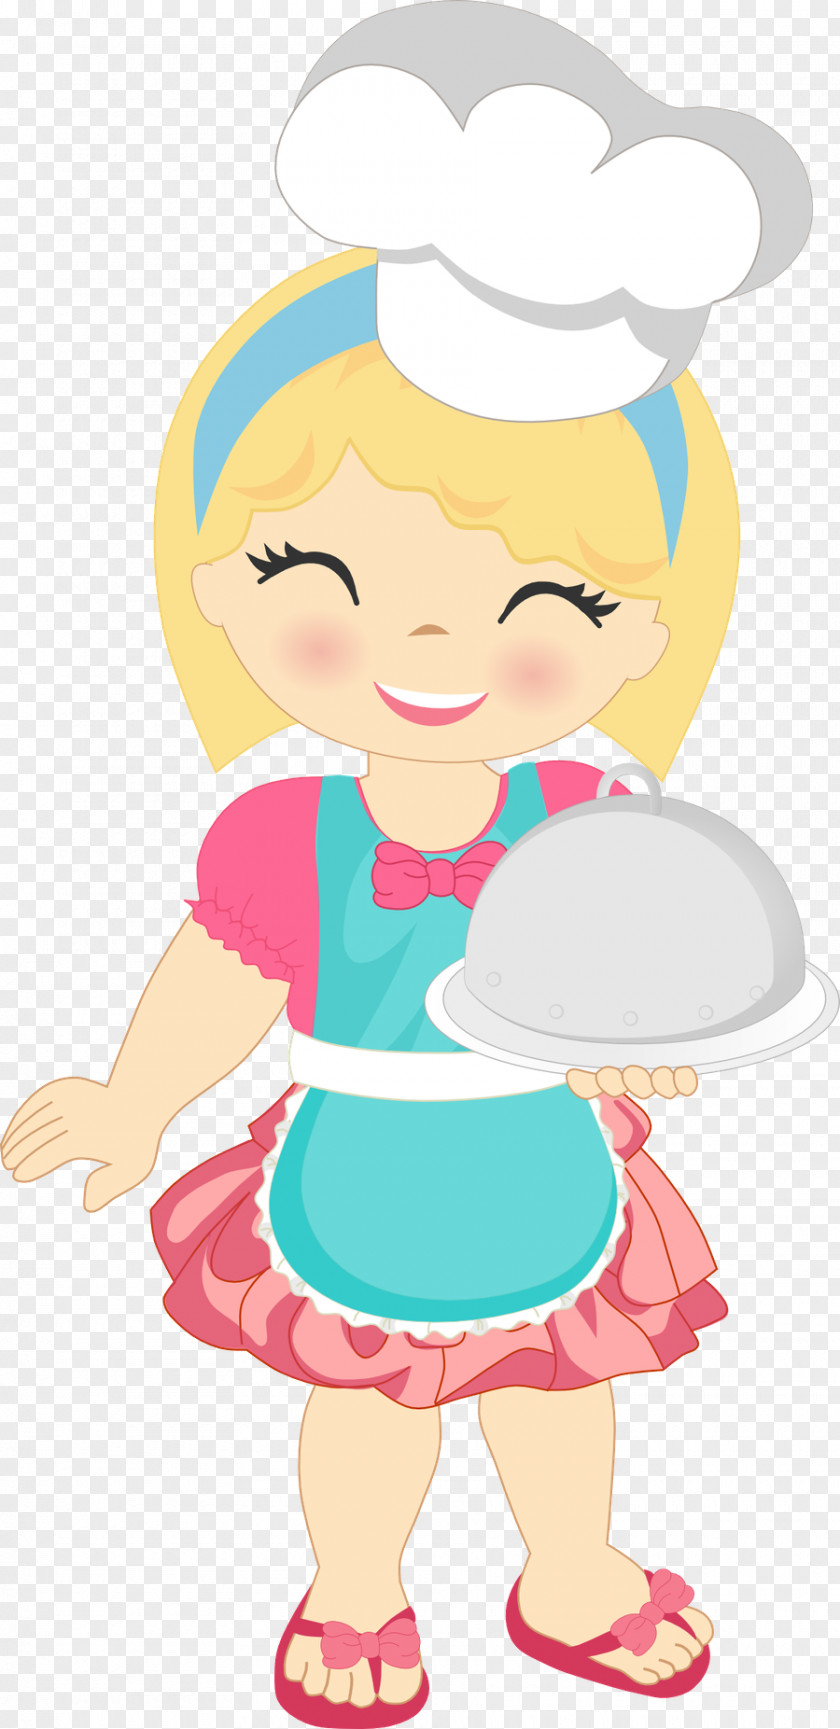 Bakery Chef Kitchen Cook Clip Art Drawing PNG